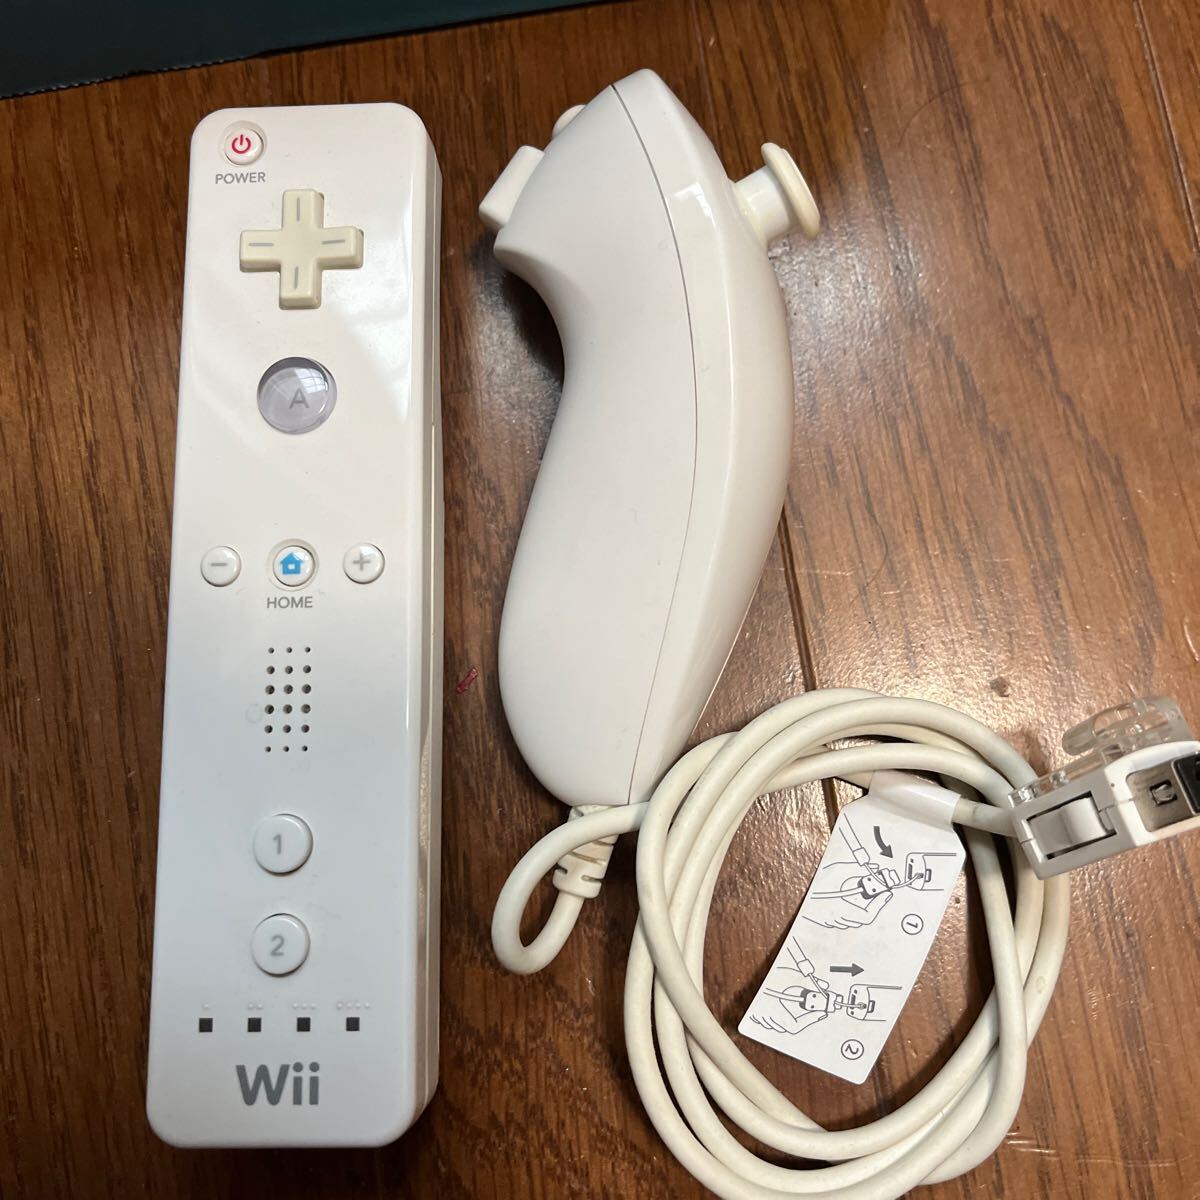  nintendo Wii used beautiful goods several times operation the first period . ending 